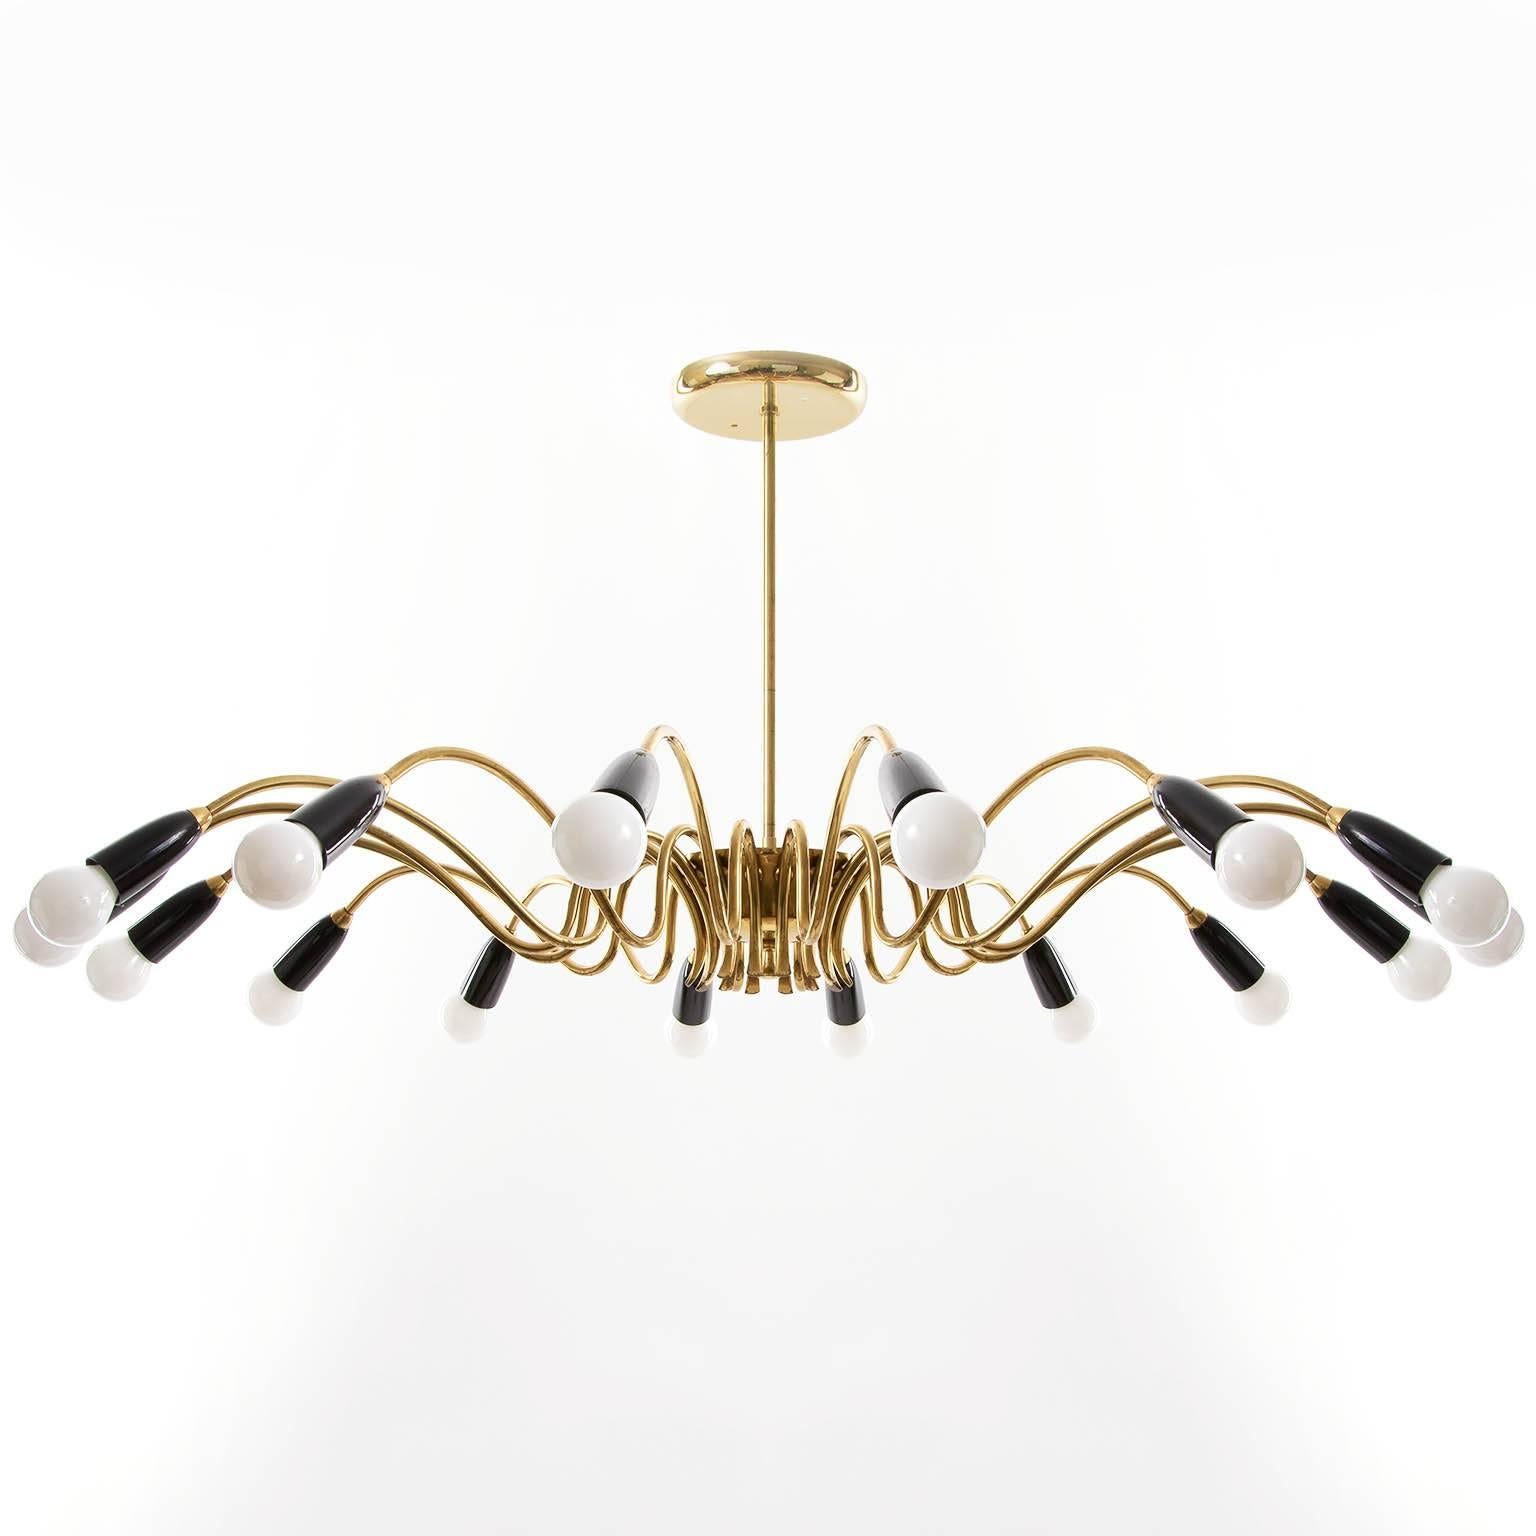 Large 16-arm brass spider light fixture with black fittings from Italy, 1960s. Can be used as chandelier or as flush mount. The stem can be altered to any size for free. Little and nice patina on brass. 16 small base bulbs.

Diameter: with bulbs: